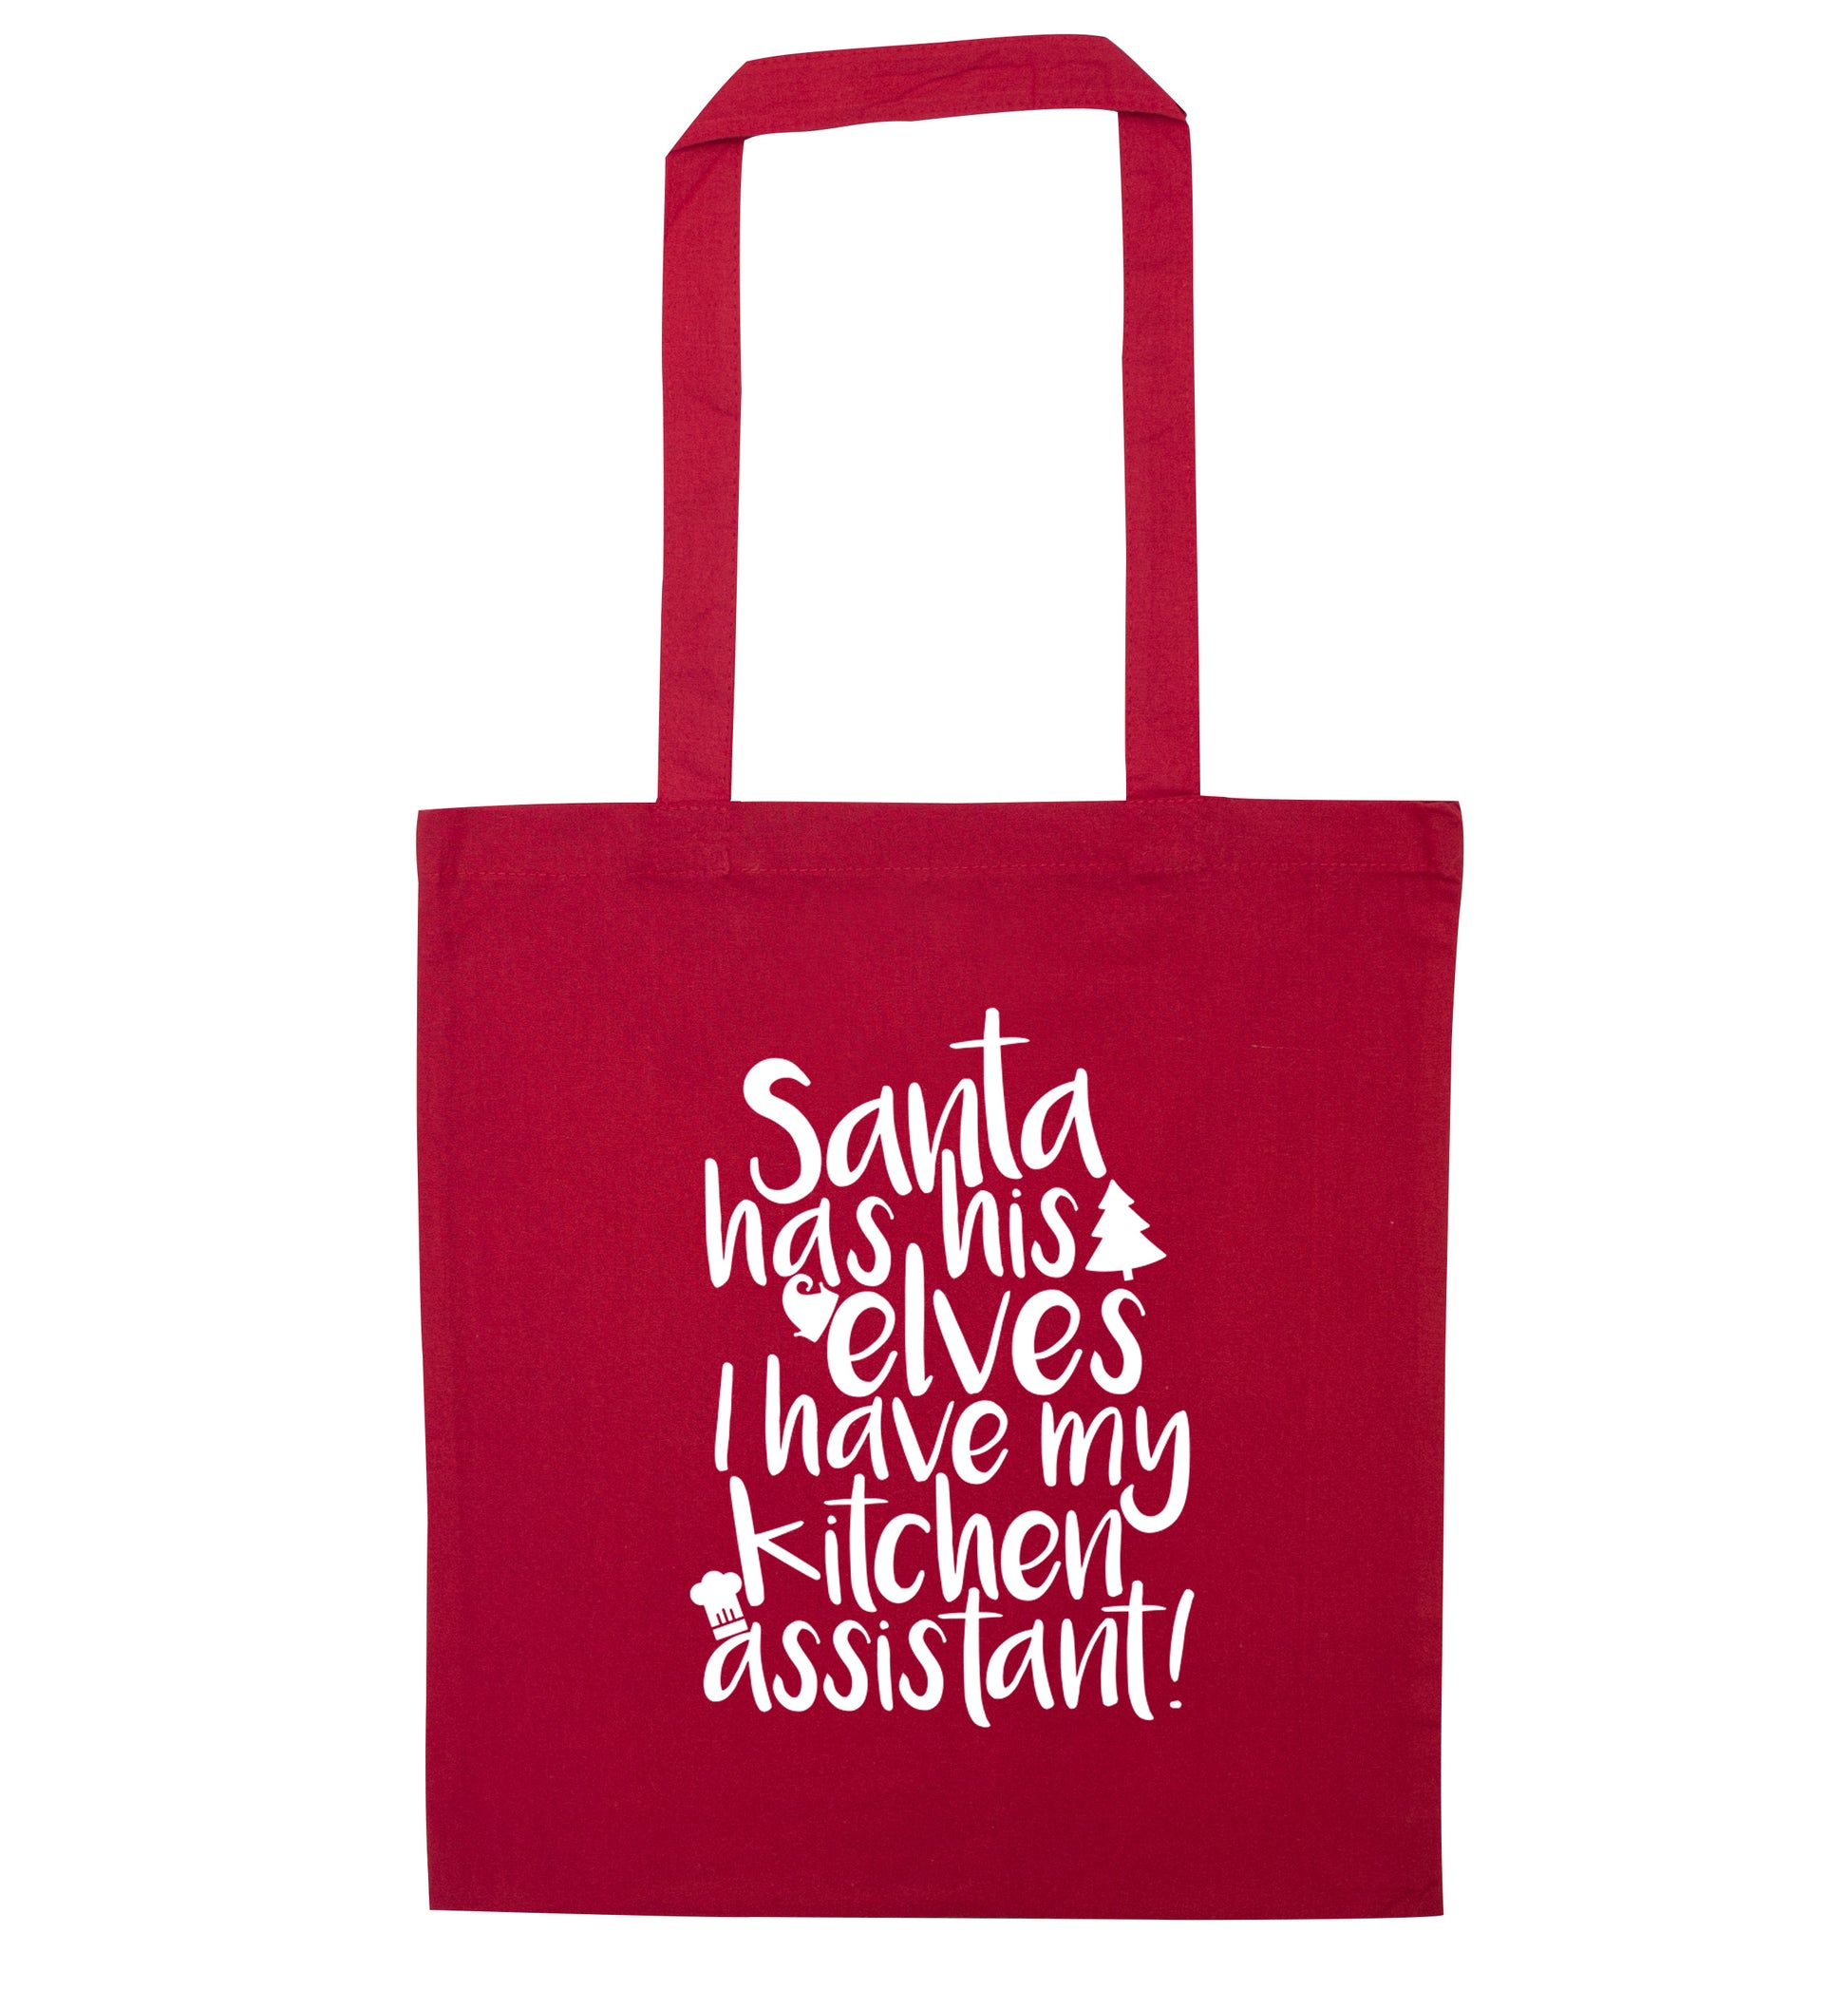 Santa has his elves I have my kitchen assistant red tote bag